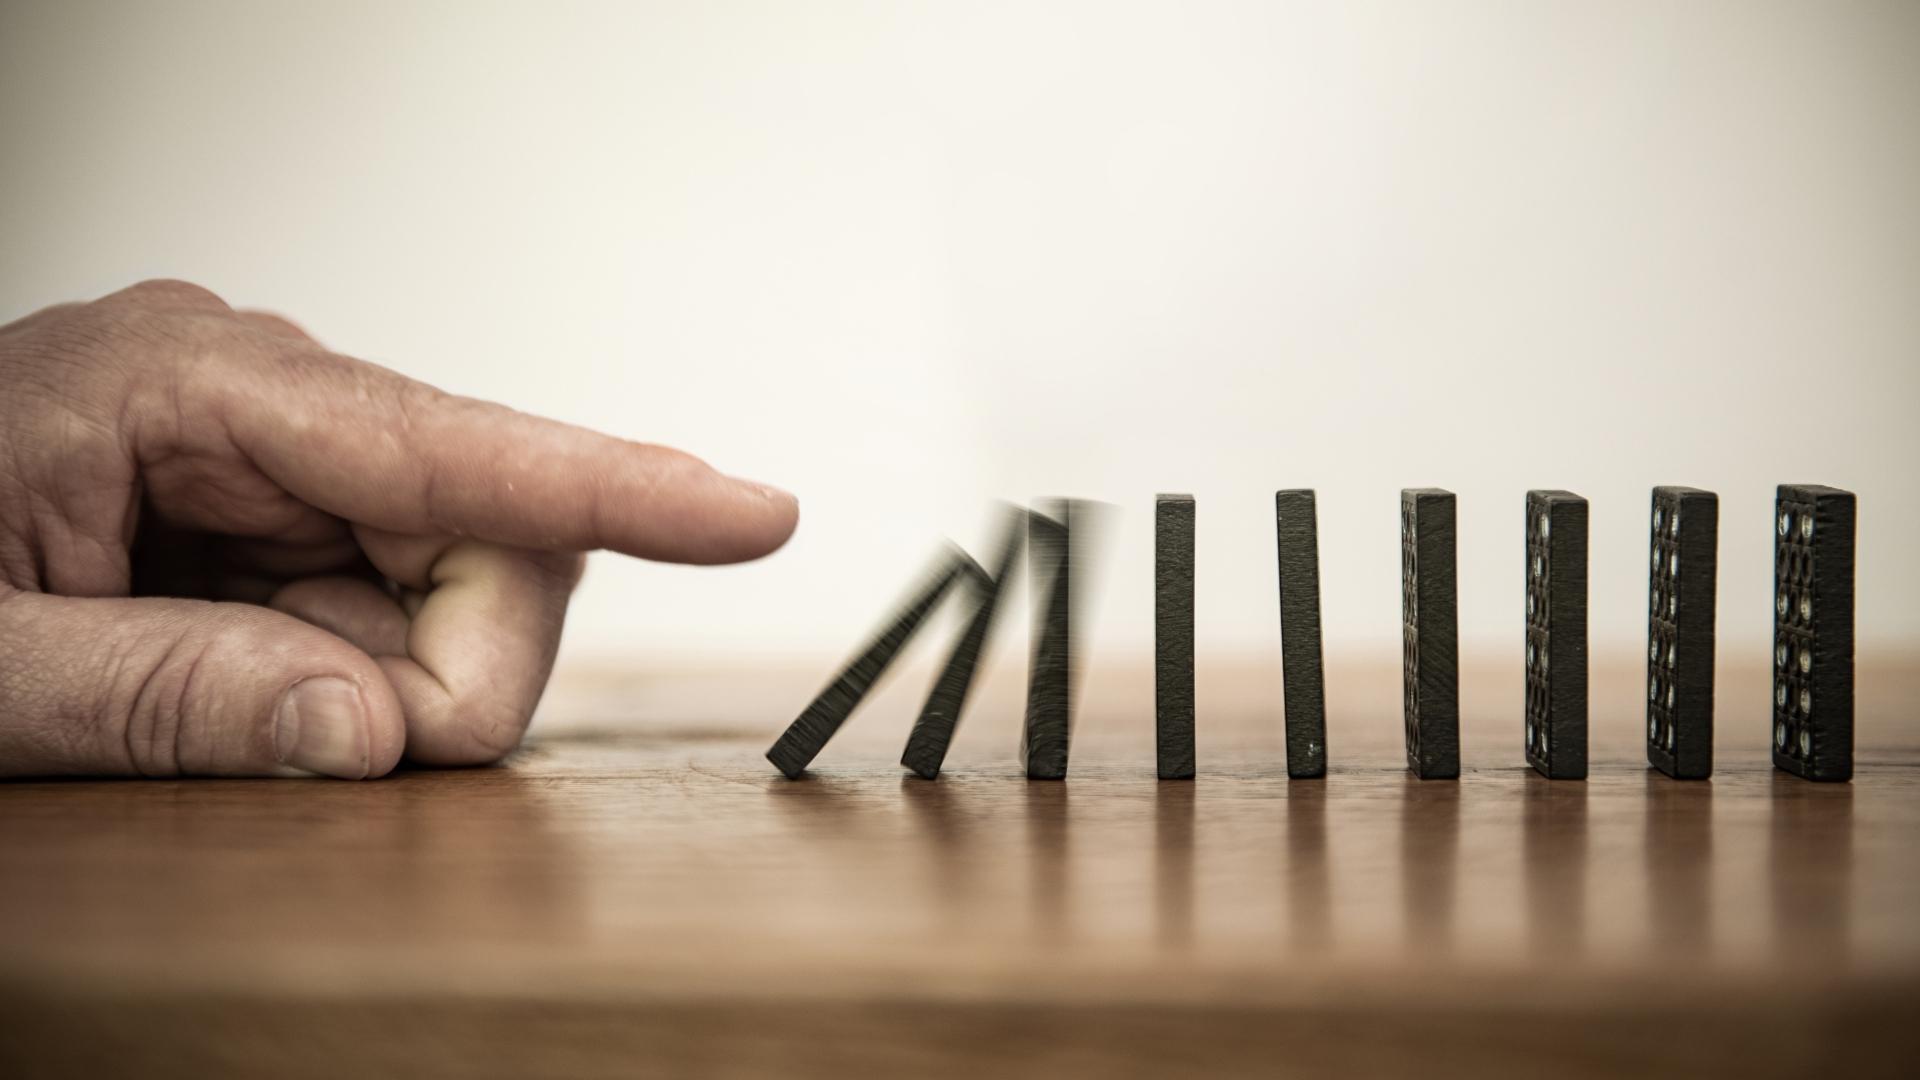 Domino pieces being toppled